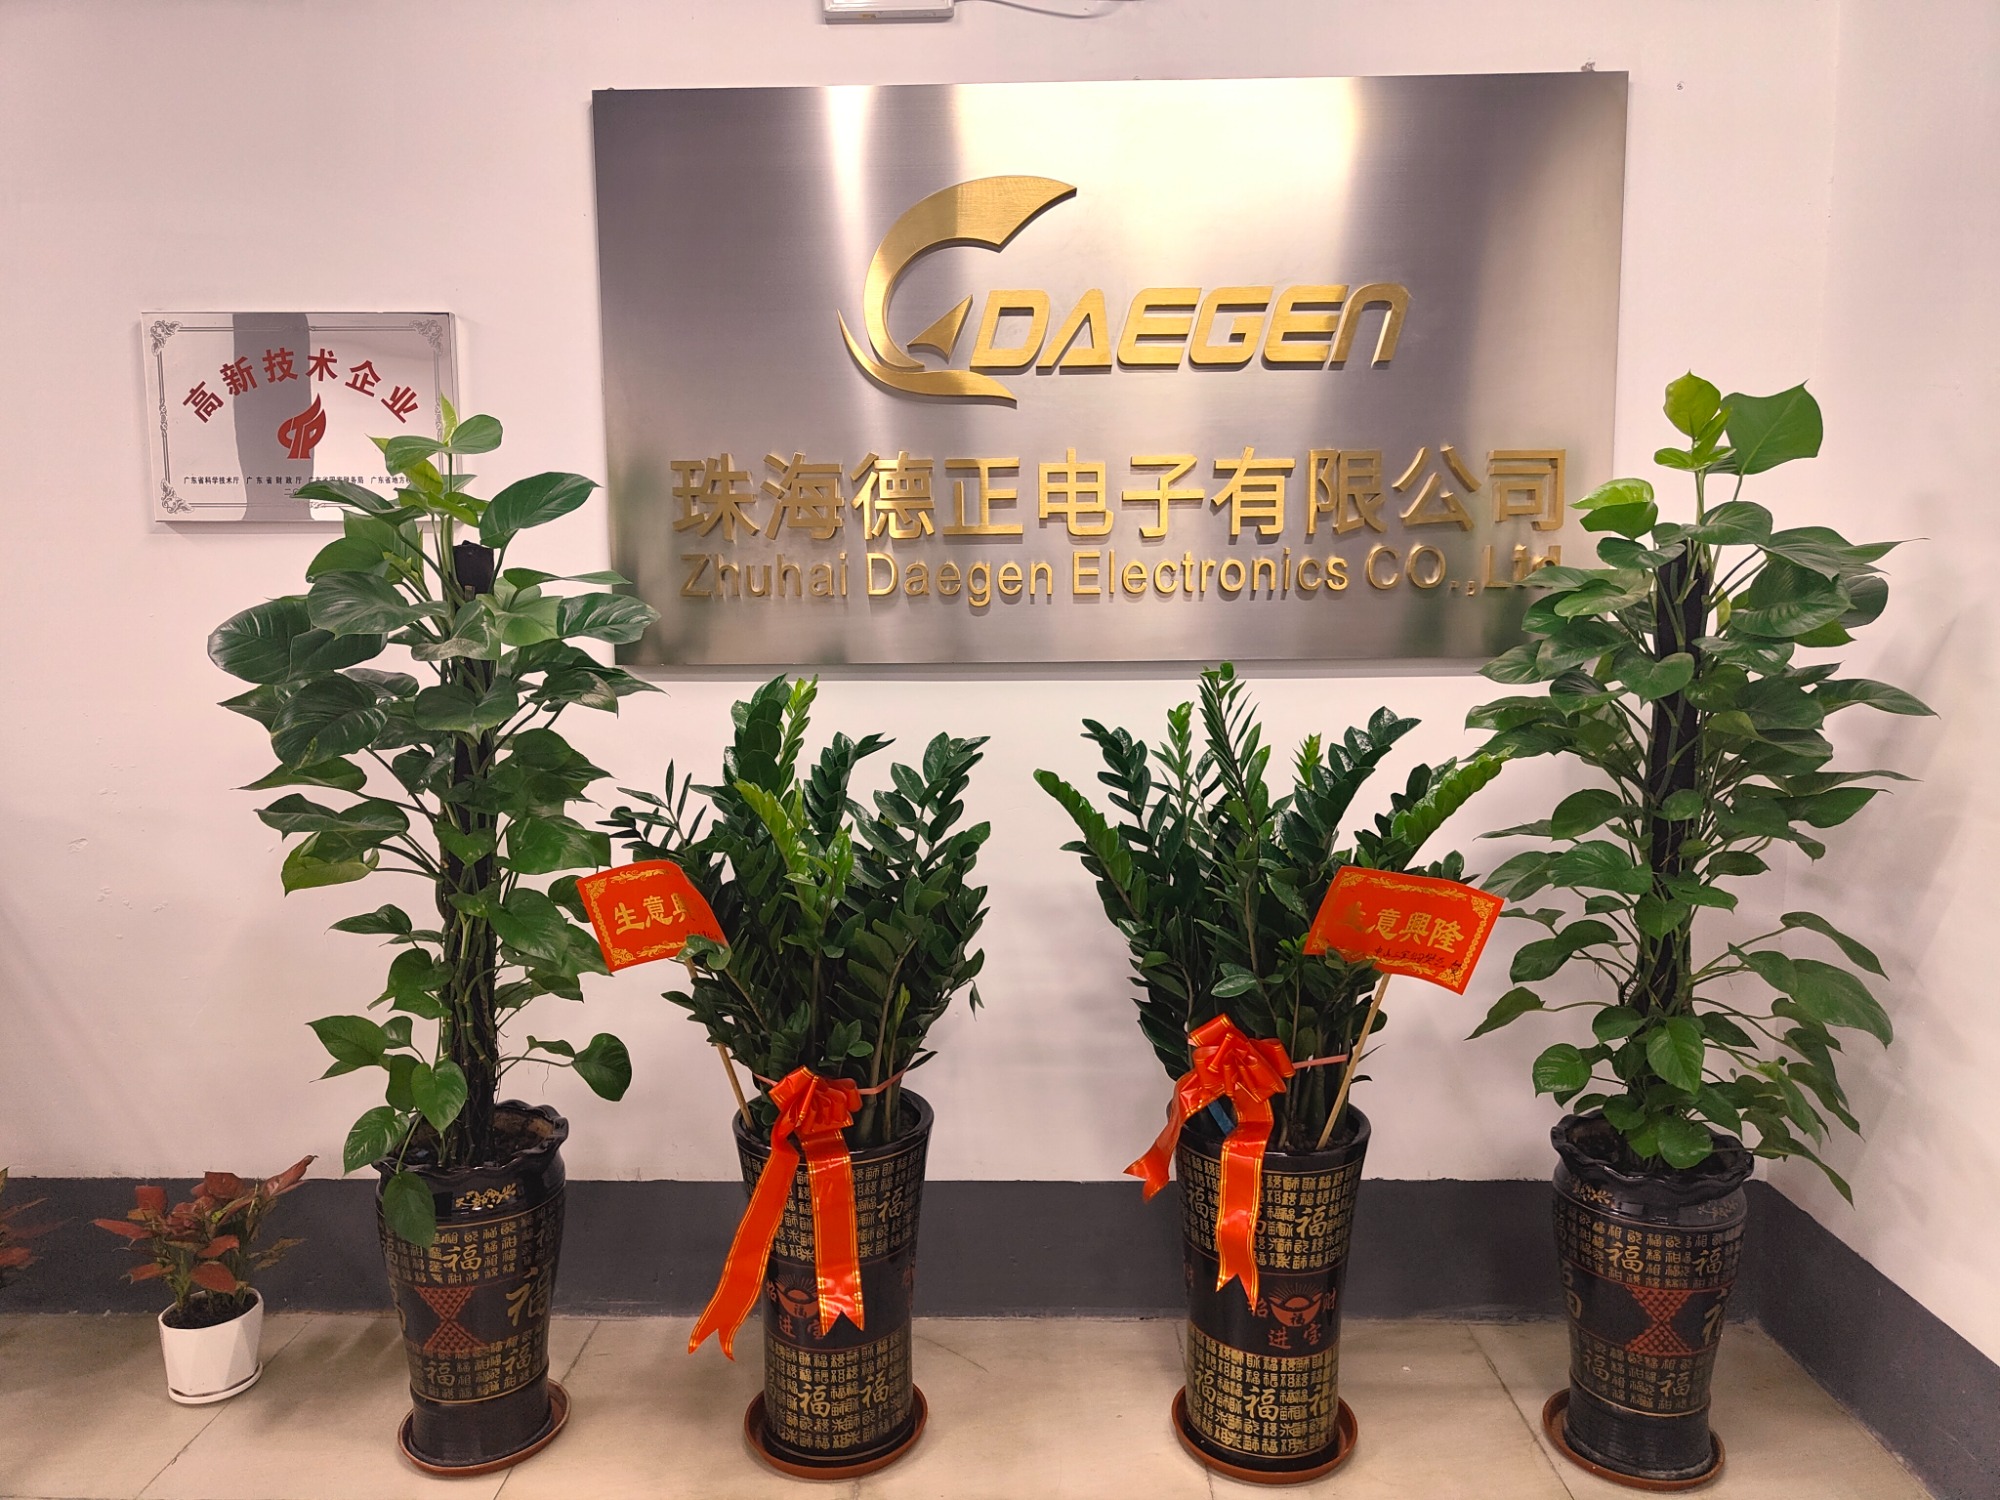 Daegen 10th anniversary celebration and new office inauguration ceremony